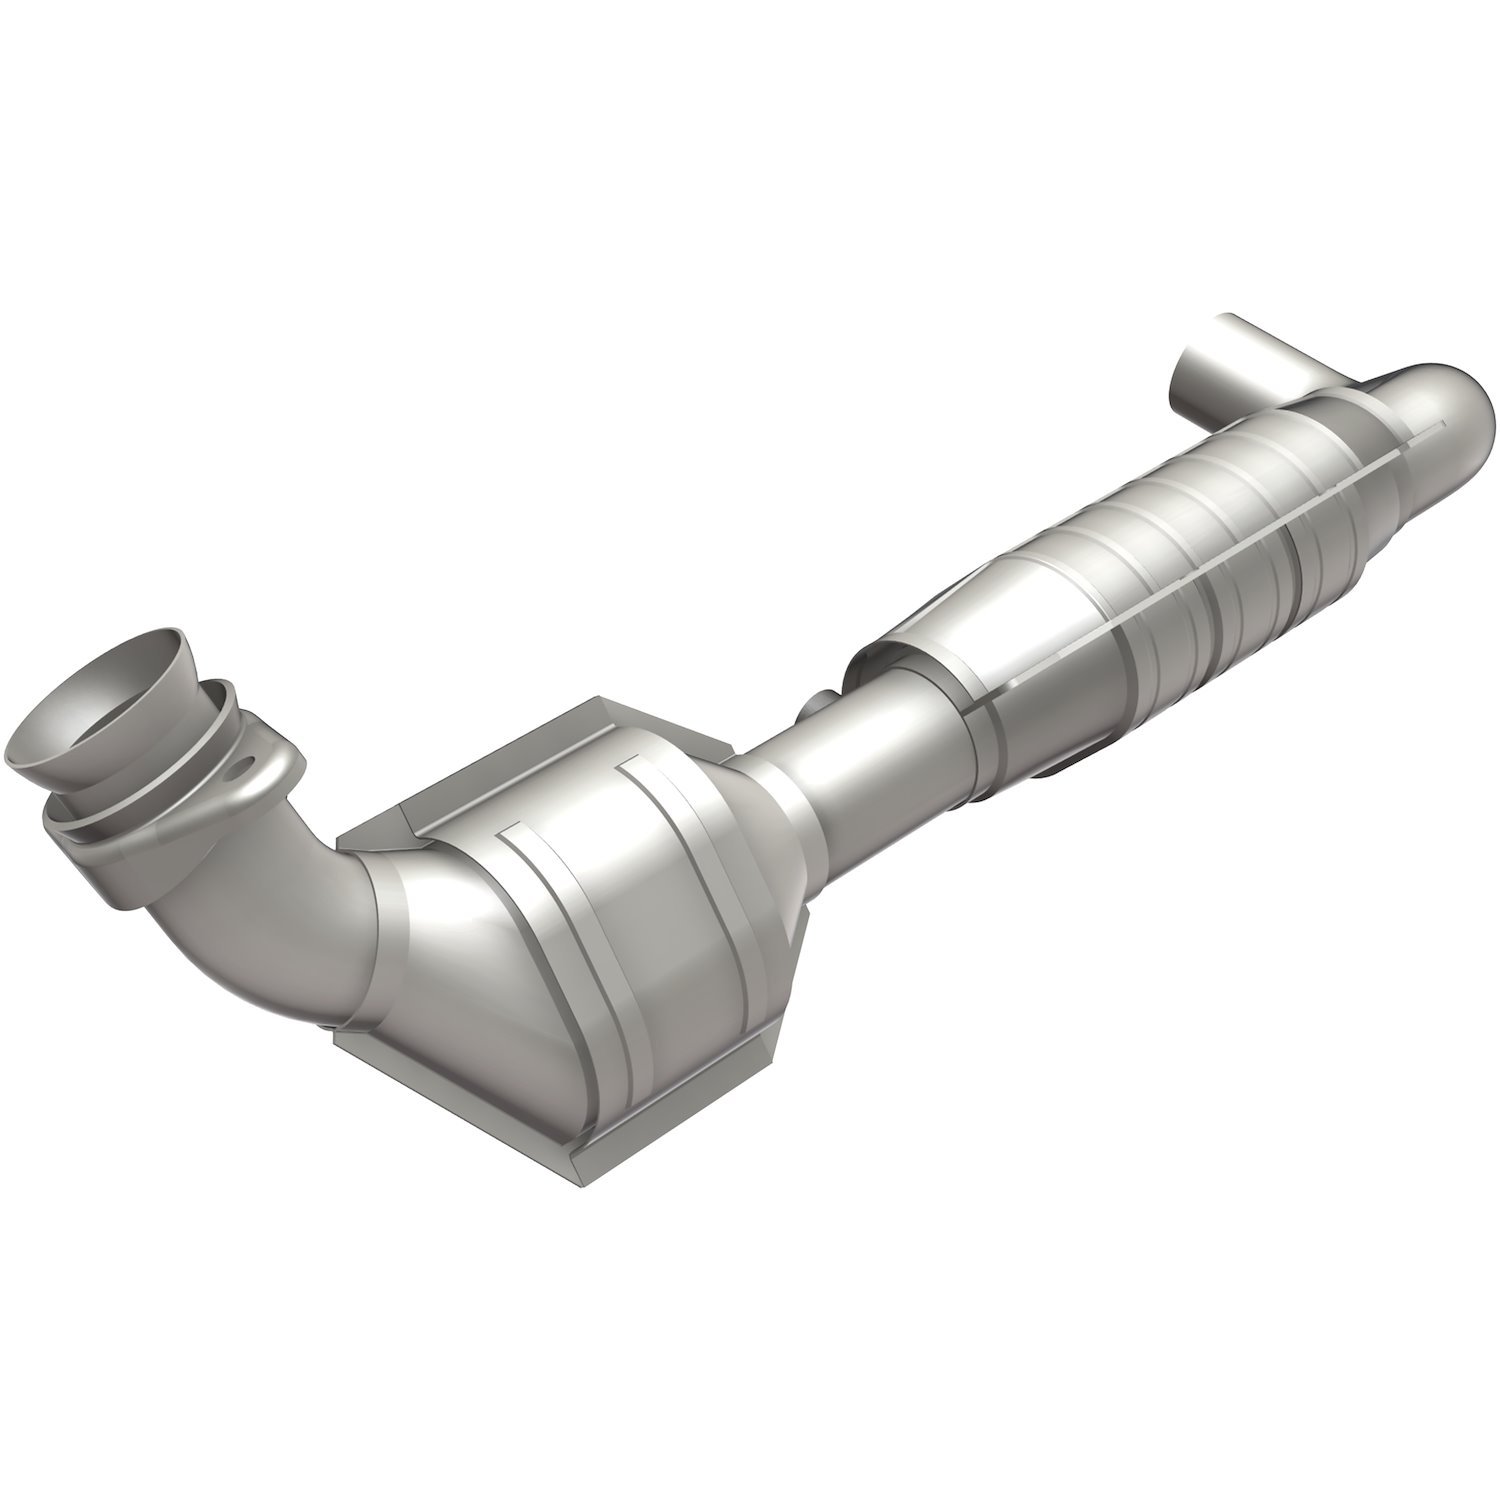 OEM Grade Federal / EPA Compliant Direct-Fit Catalytic Converter 49705